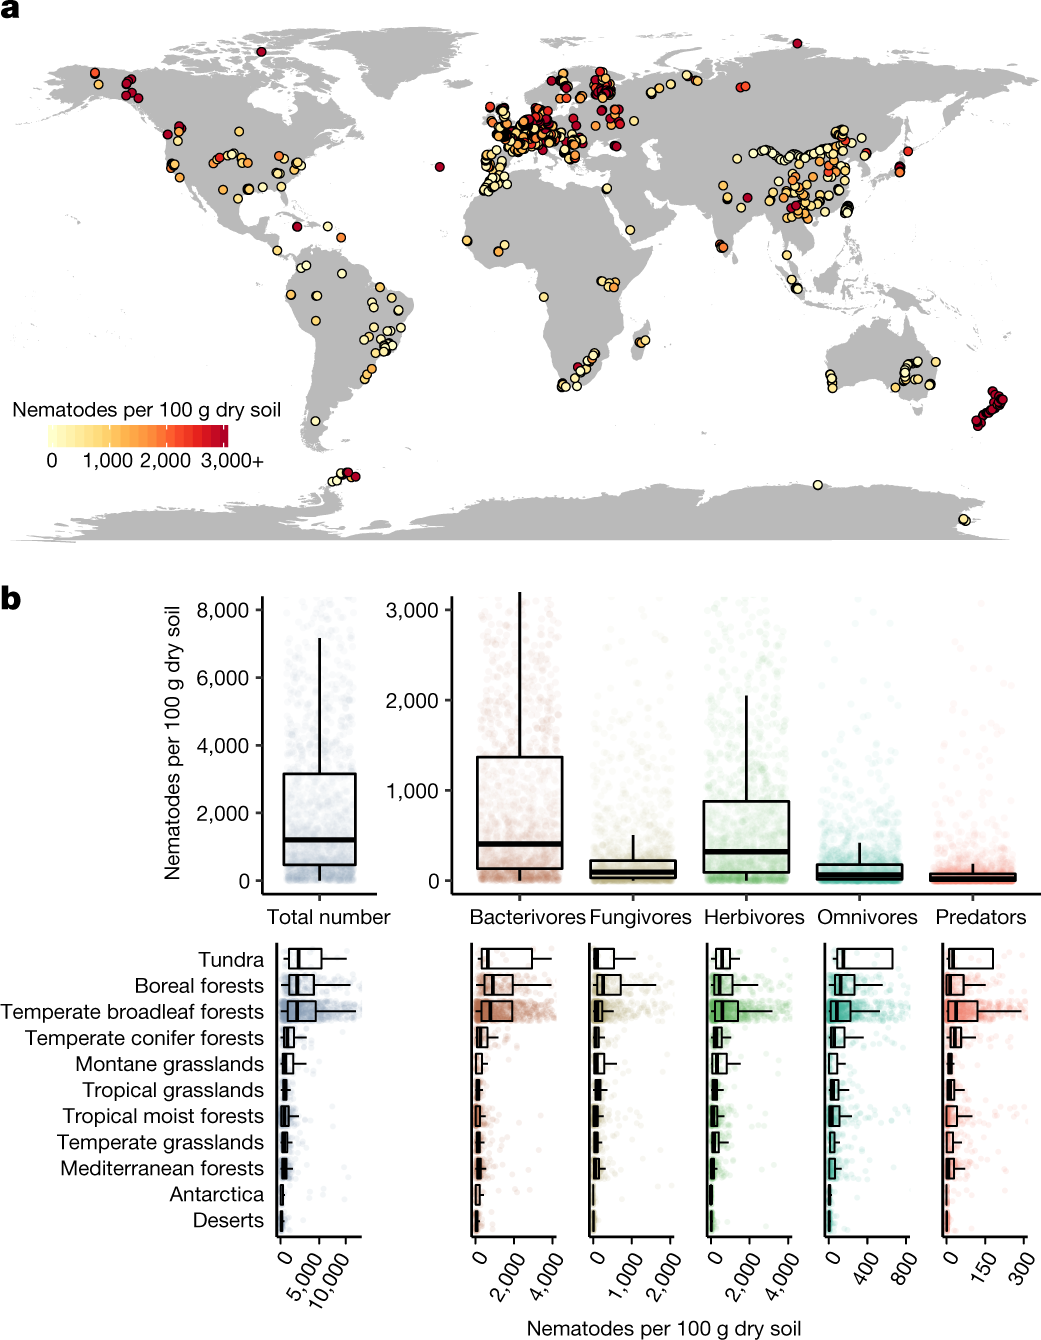 Soil nematode abundance and functional group composition at a global scale  | Nature